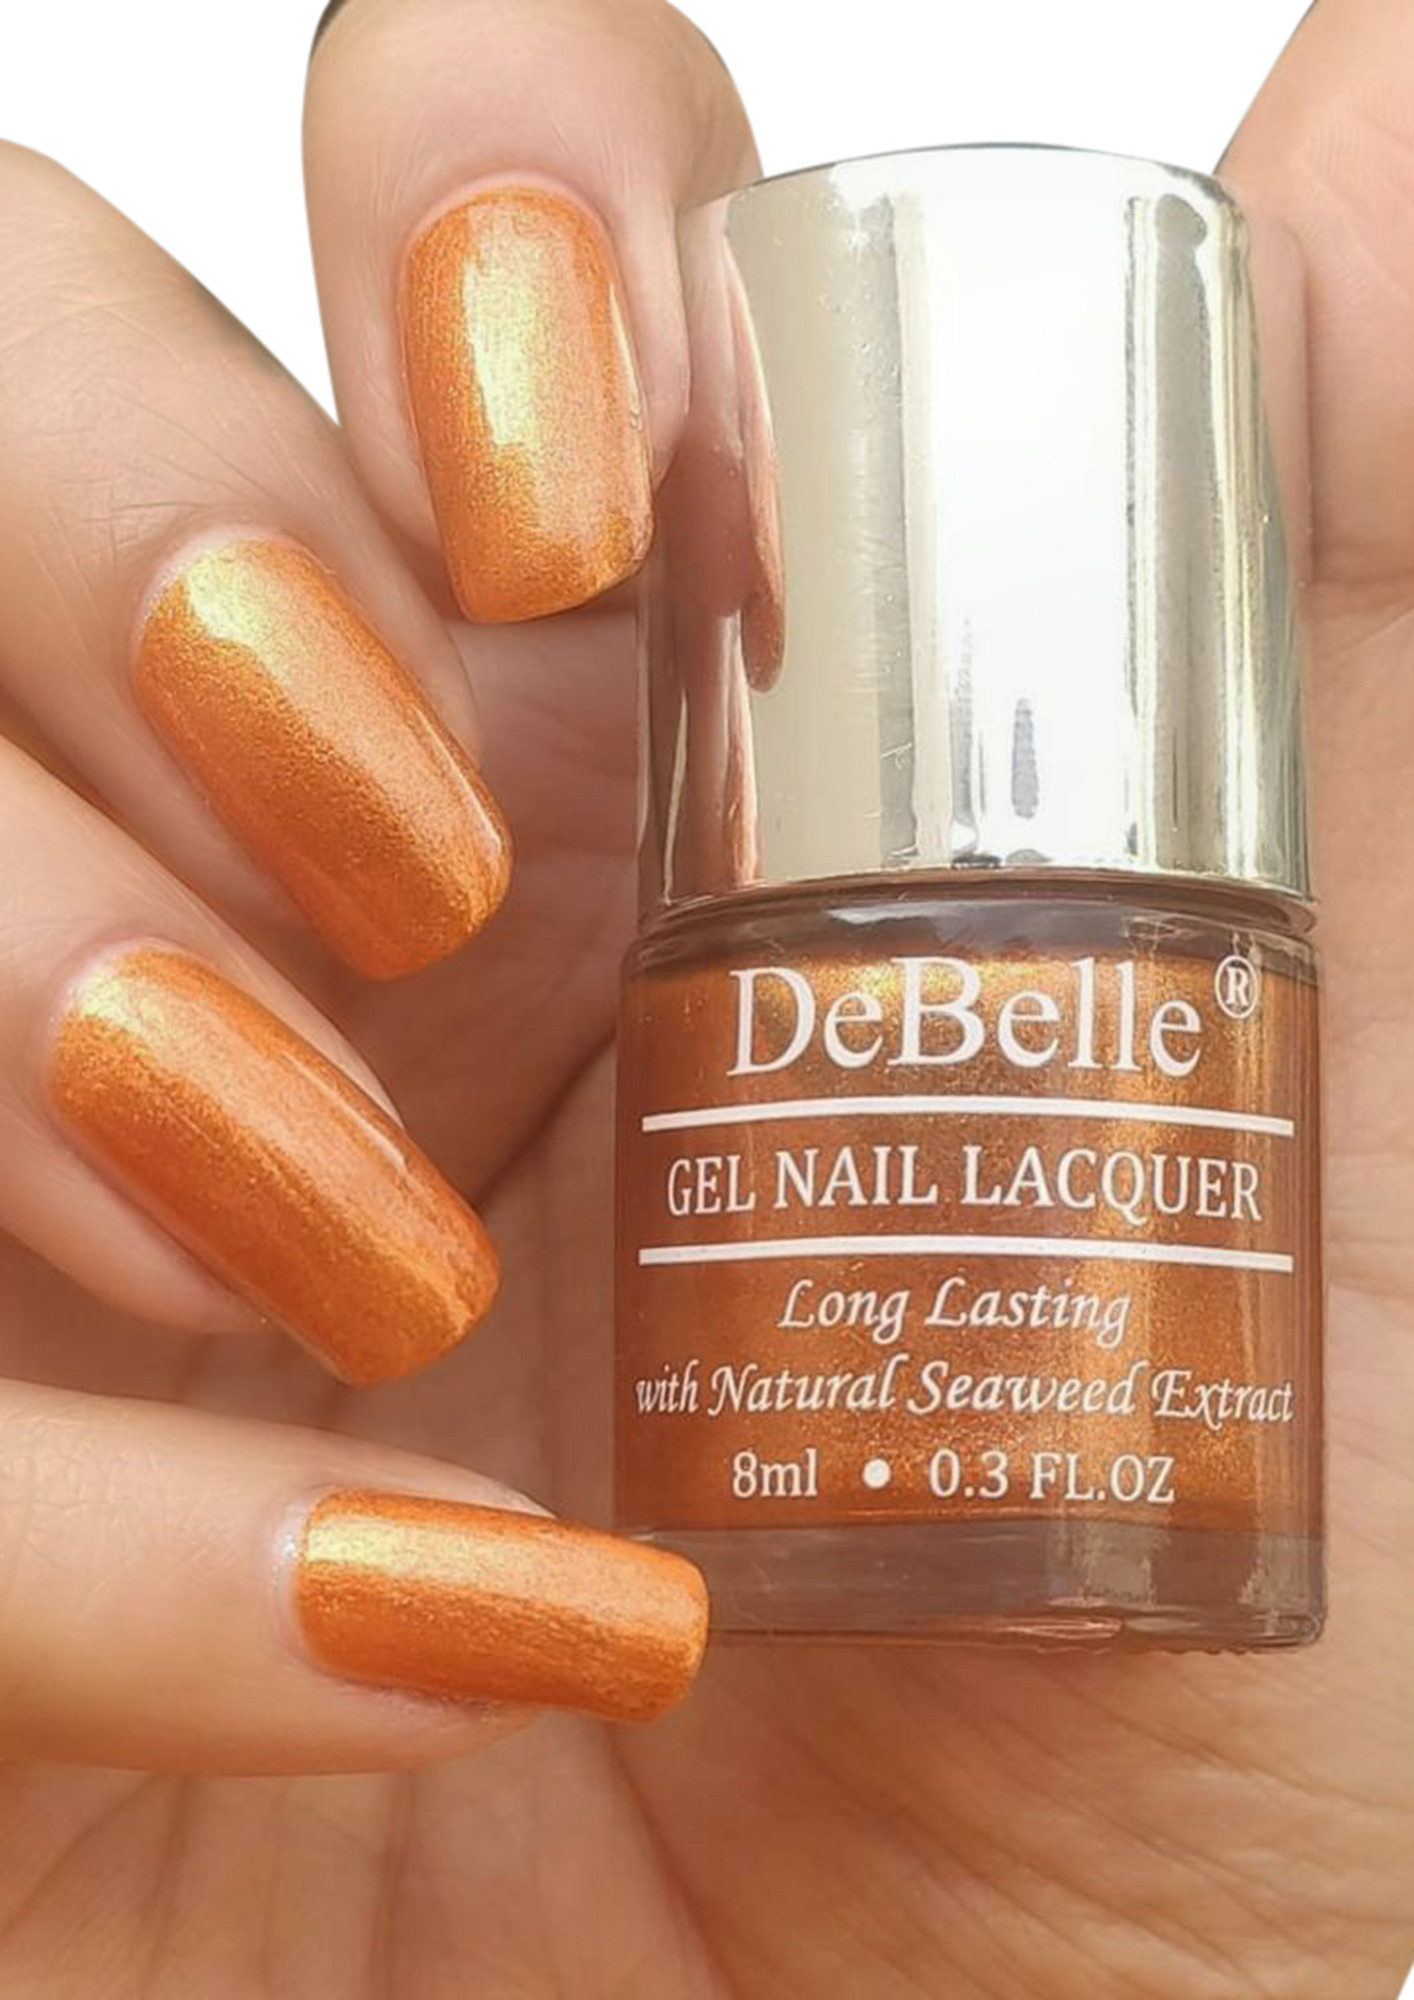 DeBelle Gel Nail Lacquer Poise Nicole - Price in India, Buy DeBelle Gel  Nail Lacquer Poise Nicole Online In India, Reviews, Ratings & Features |  Flipkart.com